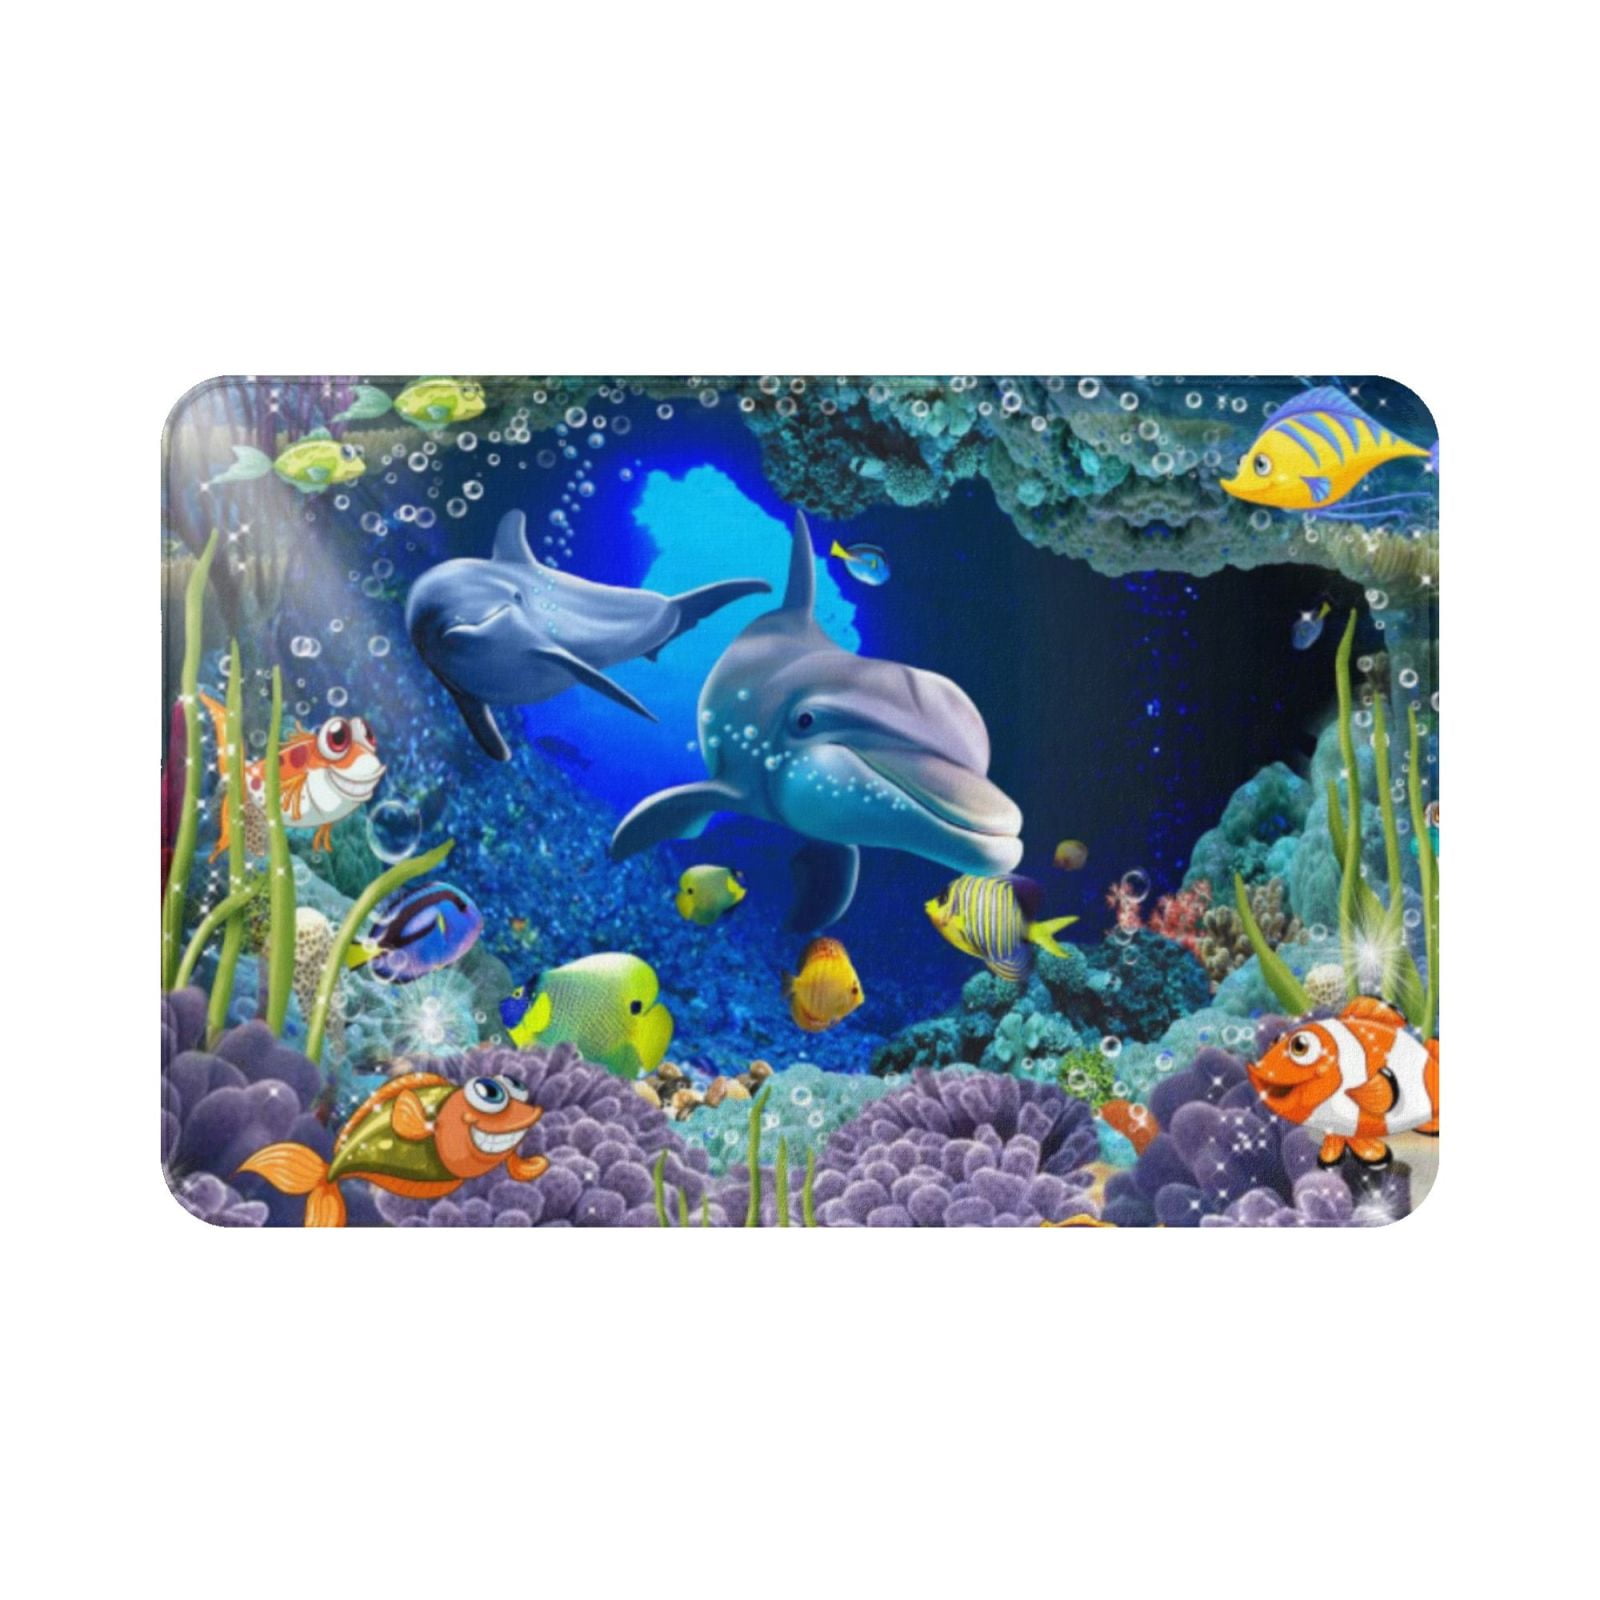 Dolphin Jumping From Sea Plush Bathroom Door Mat with Non Slip Backing 16x24" 